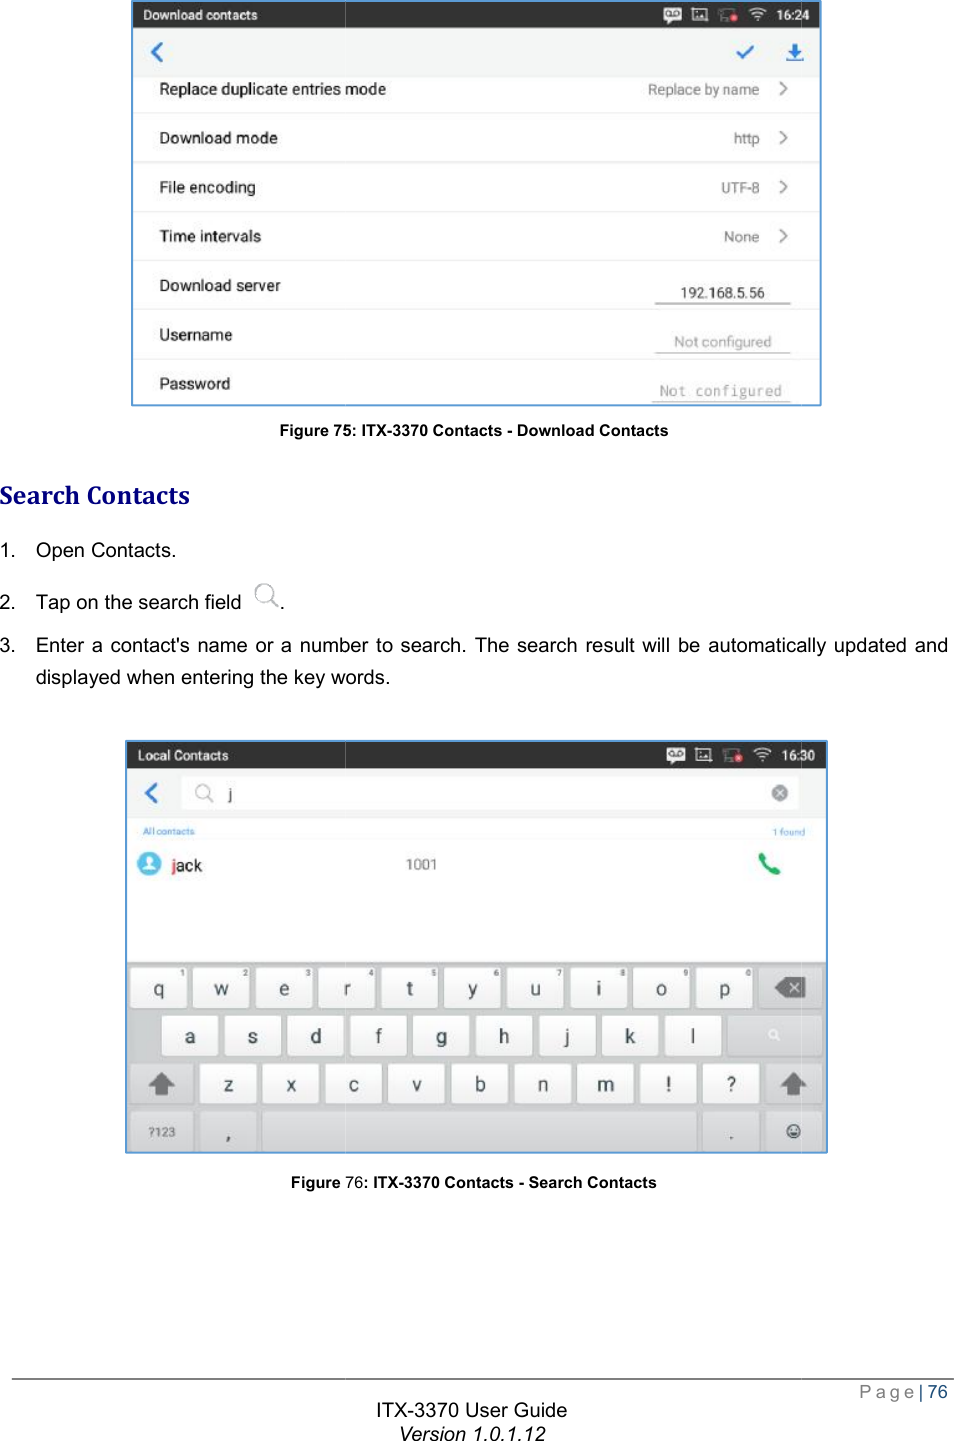   Figure 75Search Contacts 1. Open Contacts. 2. Tap on the search field  . 3. Enter a contact&apos;s name or a number to search. The searchdisplayed when entering the key words. Figure 76  ITX-3370 User Guide Version 1.0.1.12 75: ITX-3370 Contacts - Download Contacts number to search. The search result will be automatically updated and displayed when entering the key words. 76: ITX-3370 Contacts - Search Contacts  Page| 76  result will be automatically updated and  